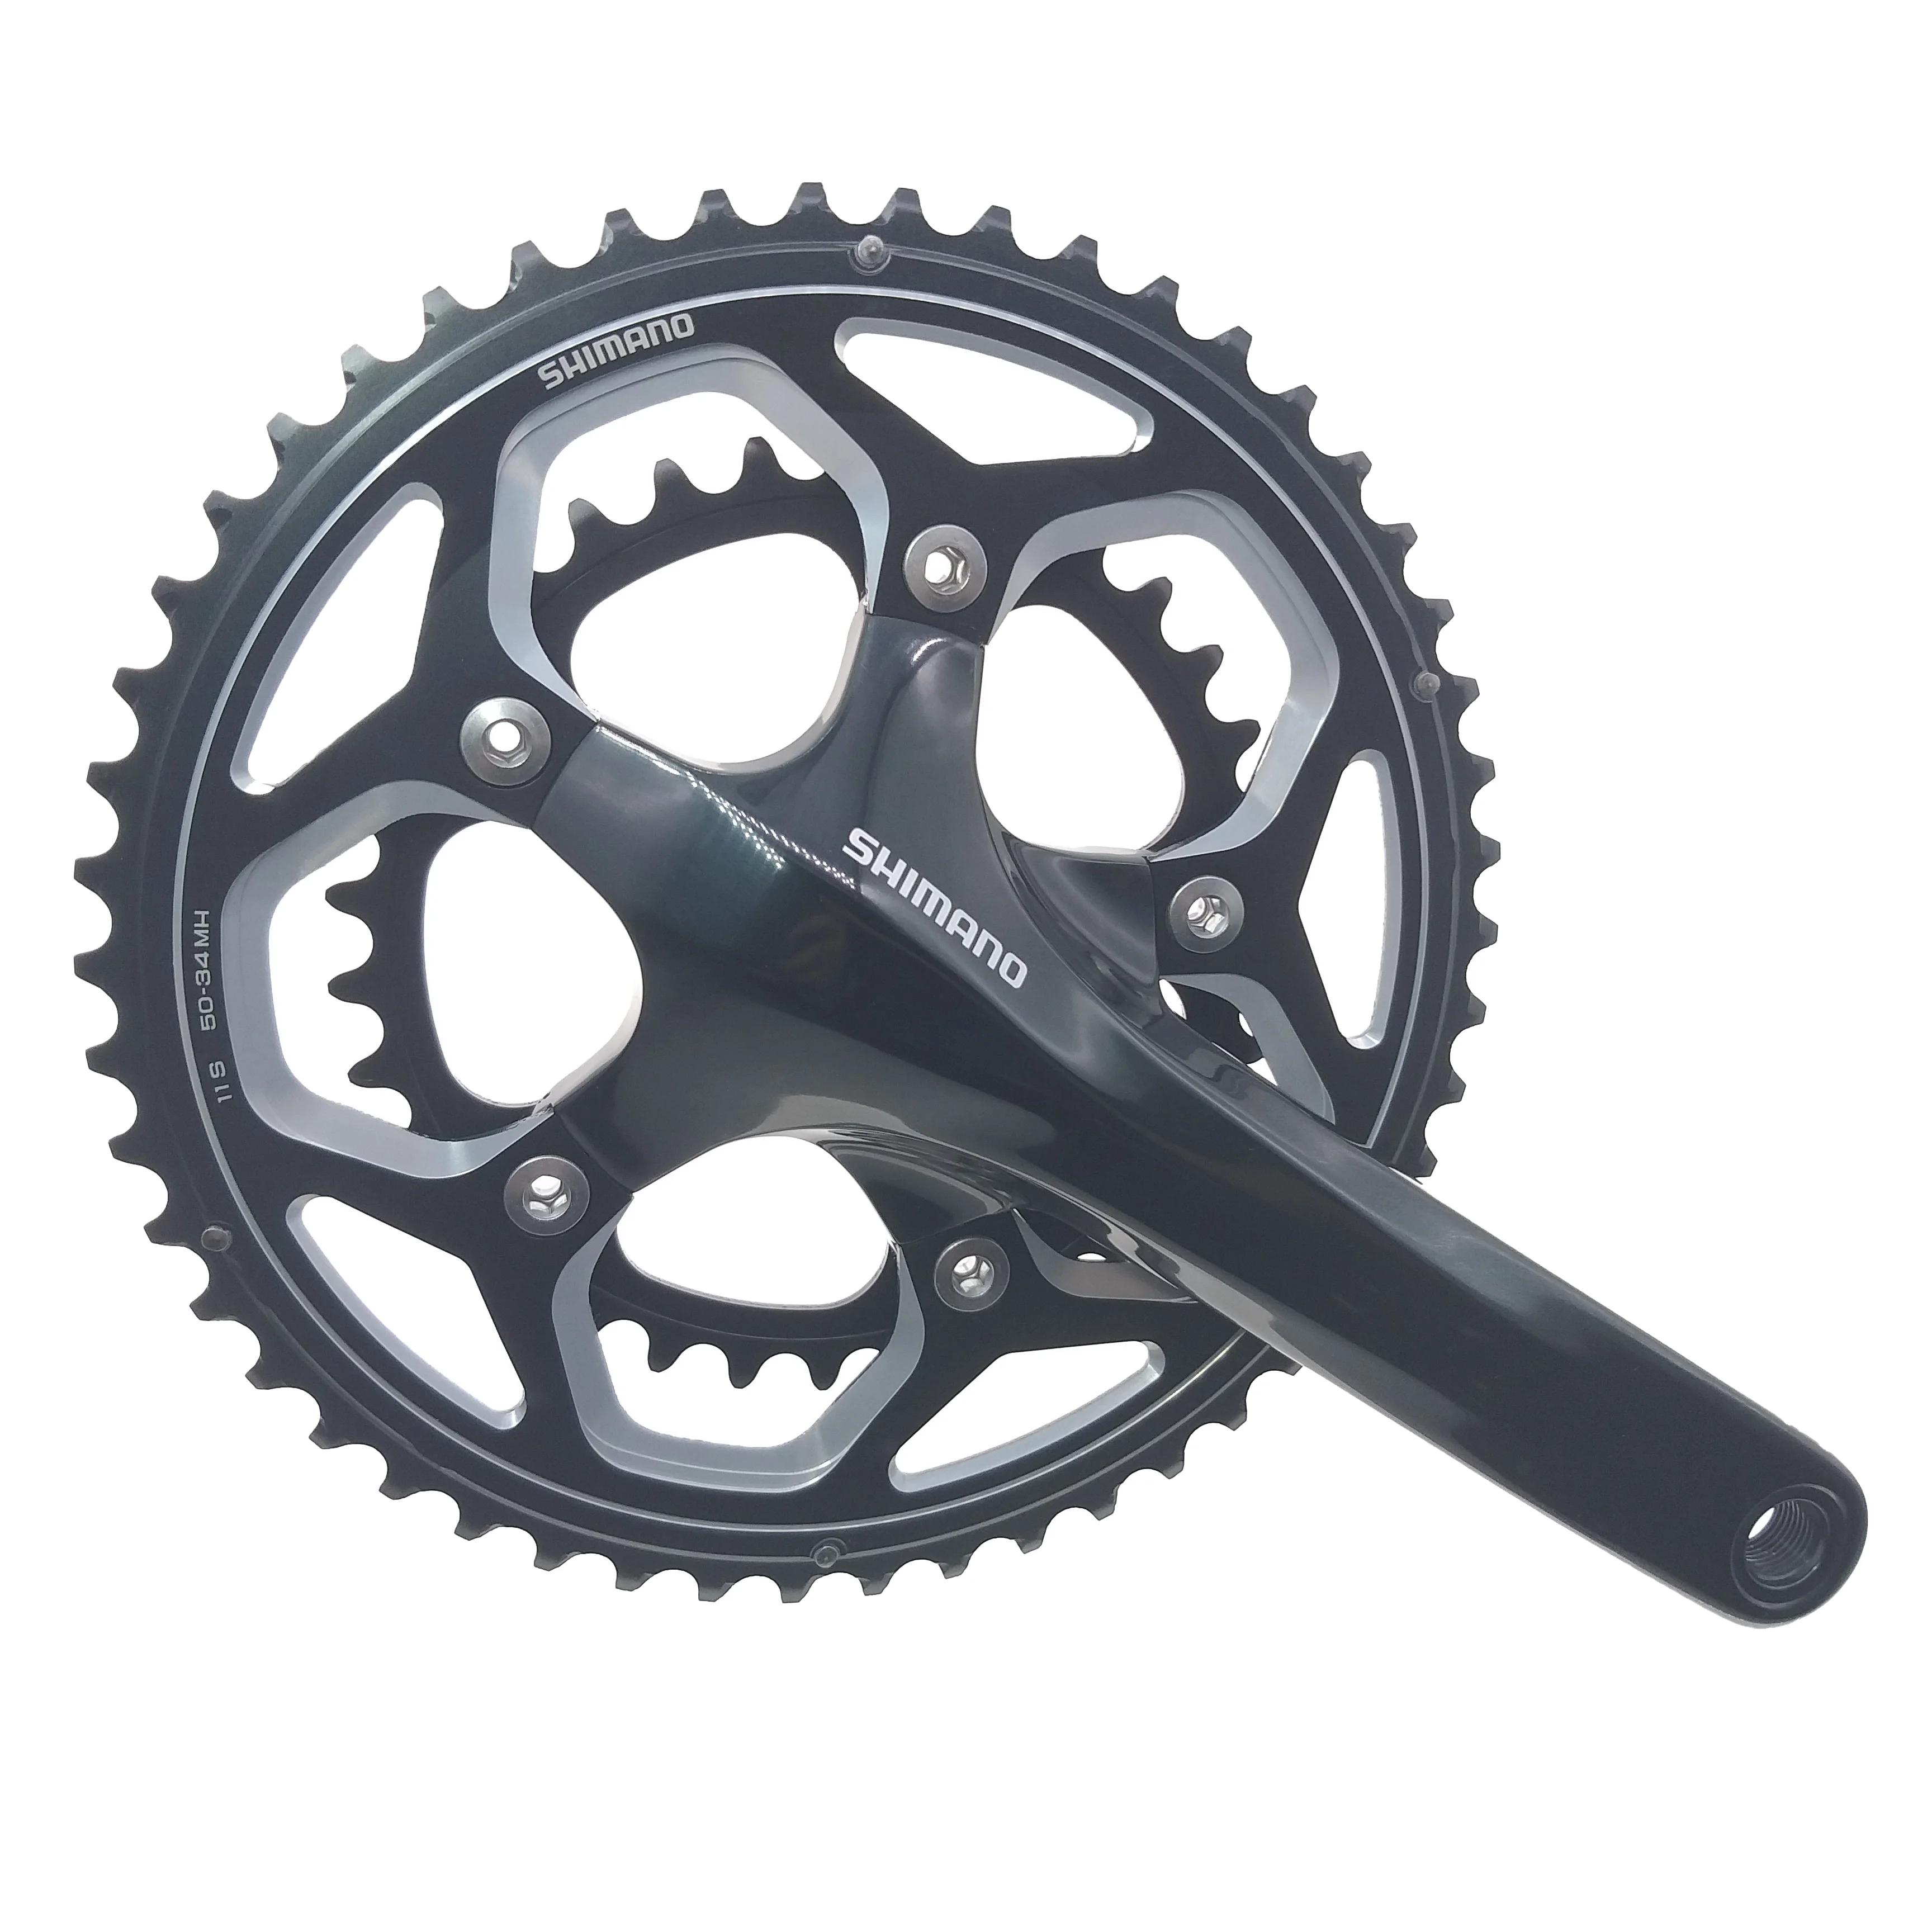 SHIMANO RS500 11 Speed FRONT CHAINRING CRANKSET CRANKARM WITH FC-RS500  BOTTOM BRACKET 11SPEED 50-34T 175MM 11S 11V 50T